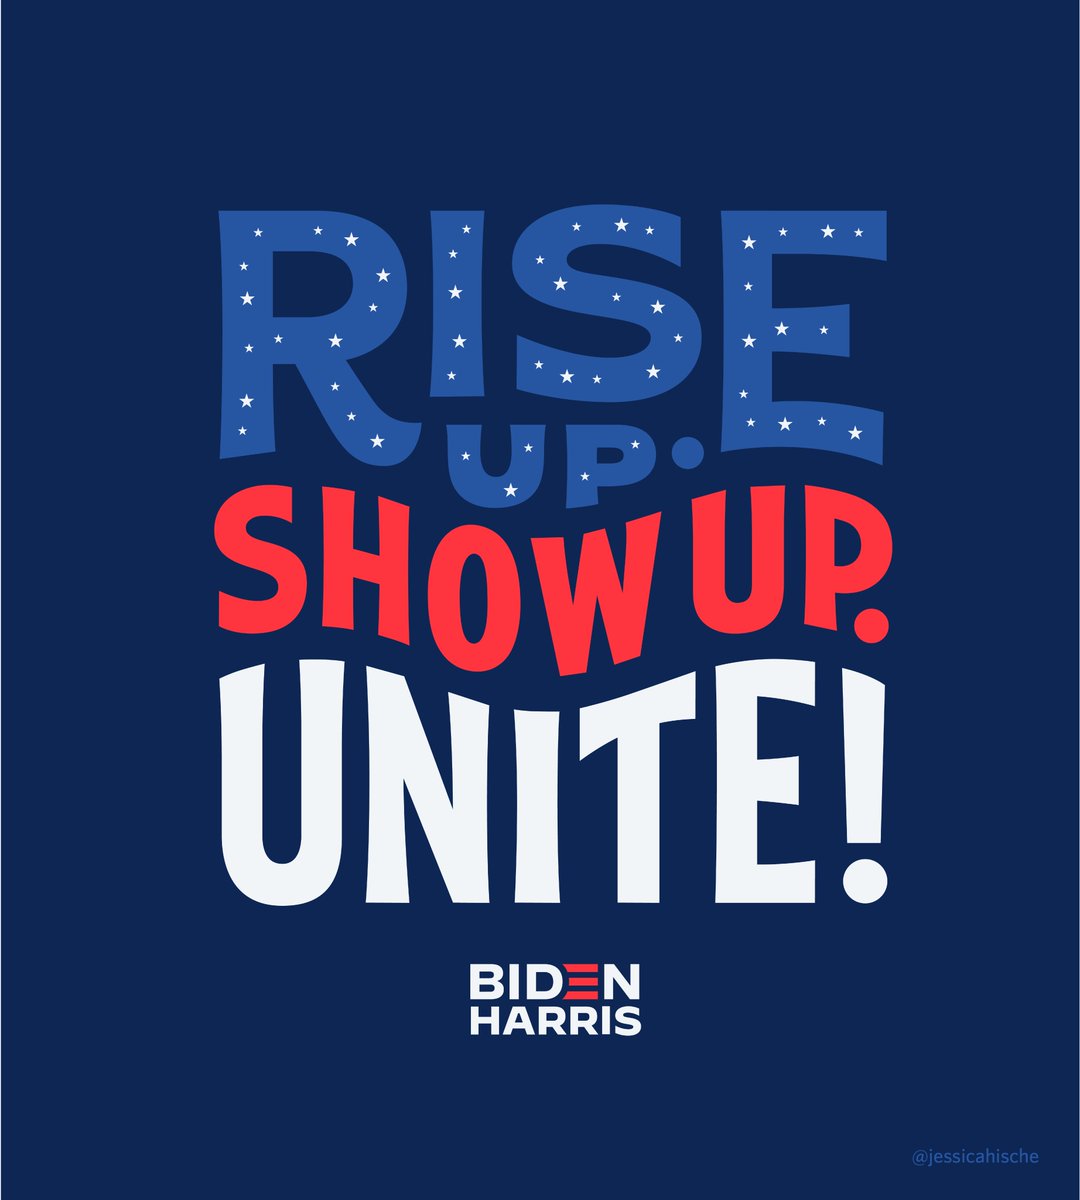 Join me and 20+ amazing artists uniting in support of Joe Biden / Kamala Harris! Read about our collective effort and see all of the work (so far!) here: http://bit.ly/riseupshowupunite